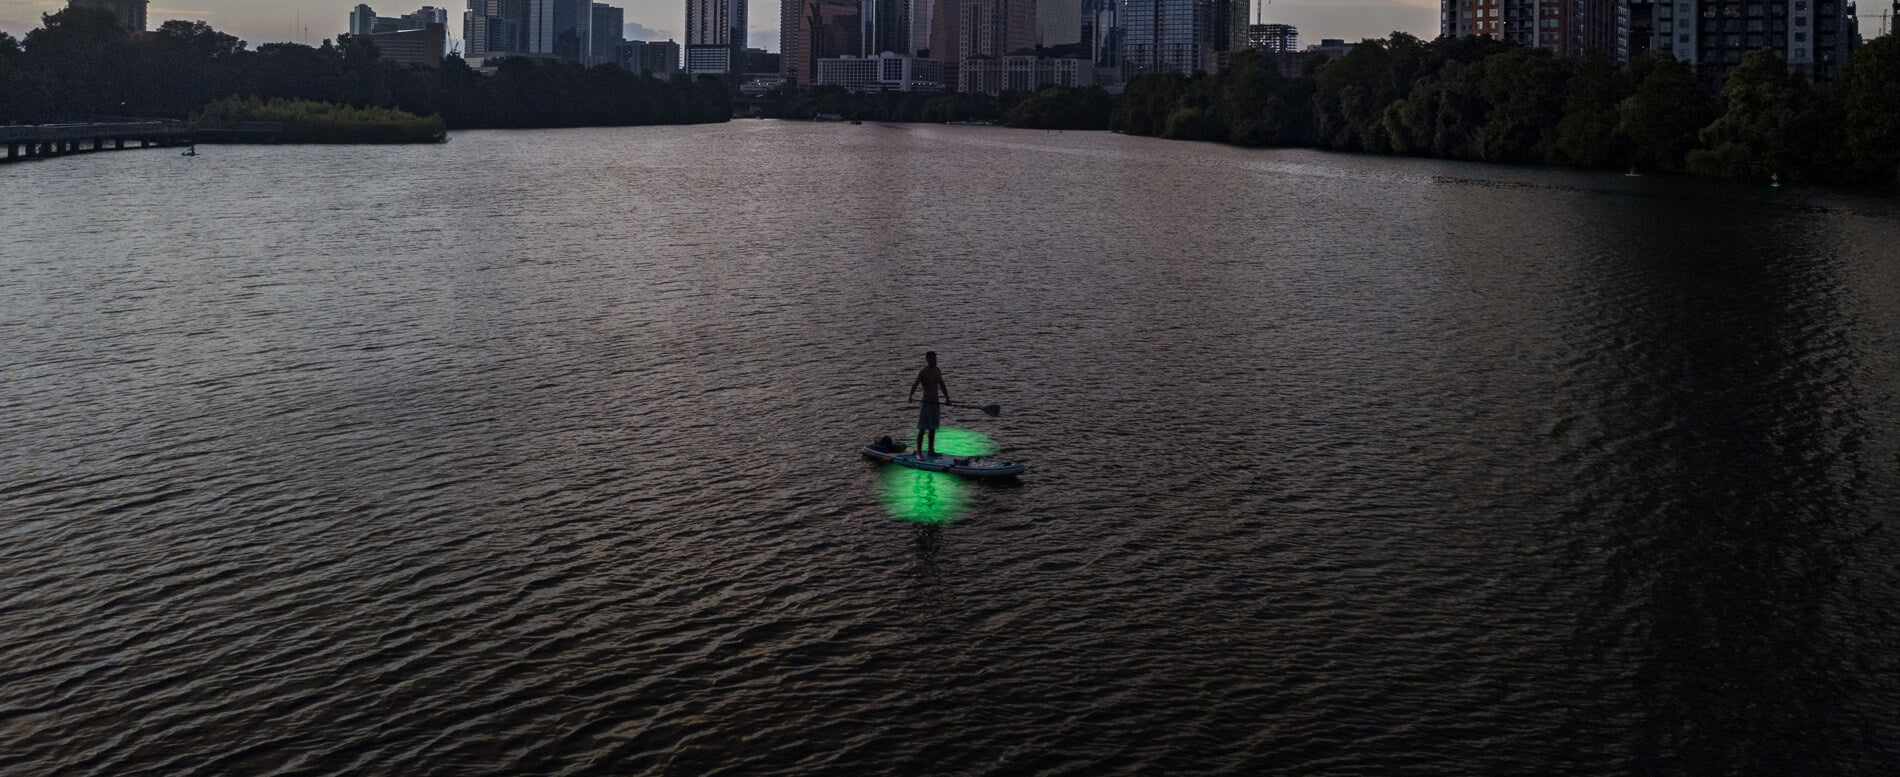 The Top 7 LED Lights You Need for Your Next Night SUP Adventure